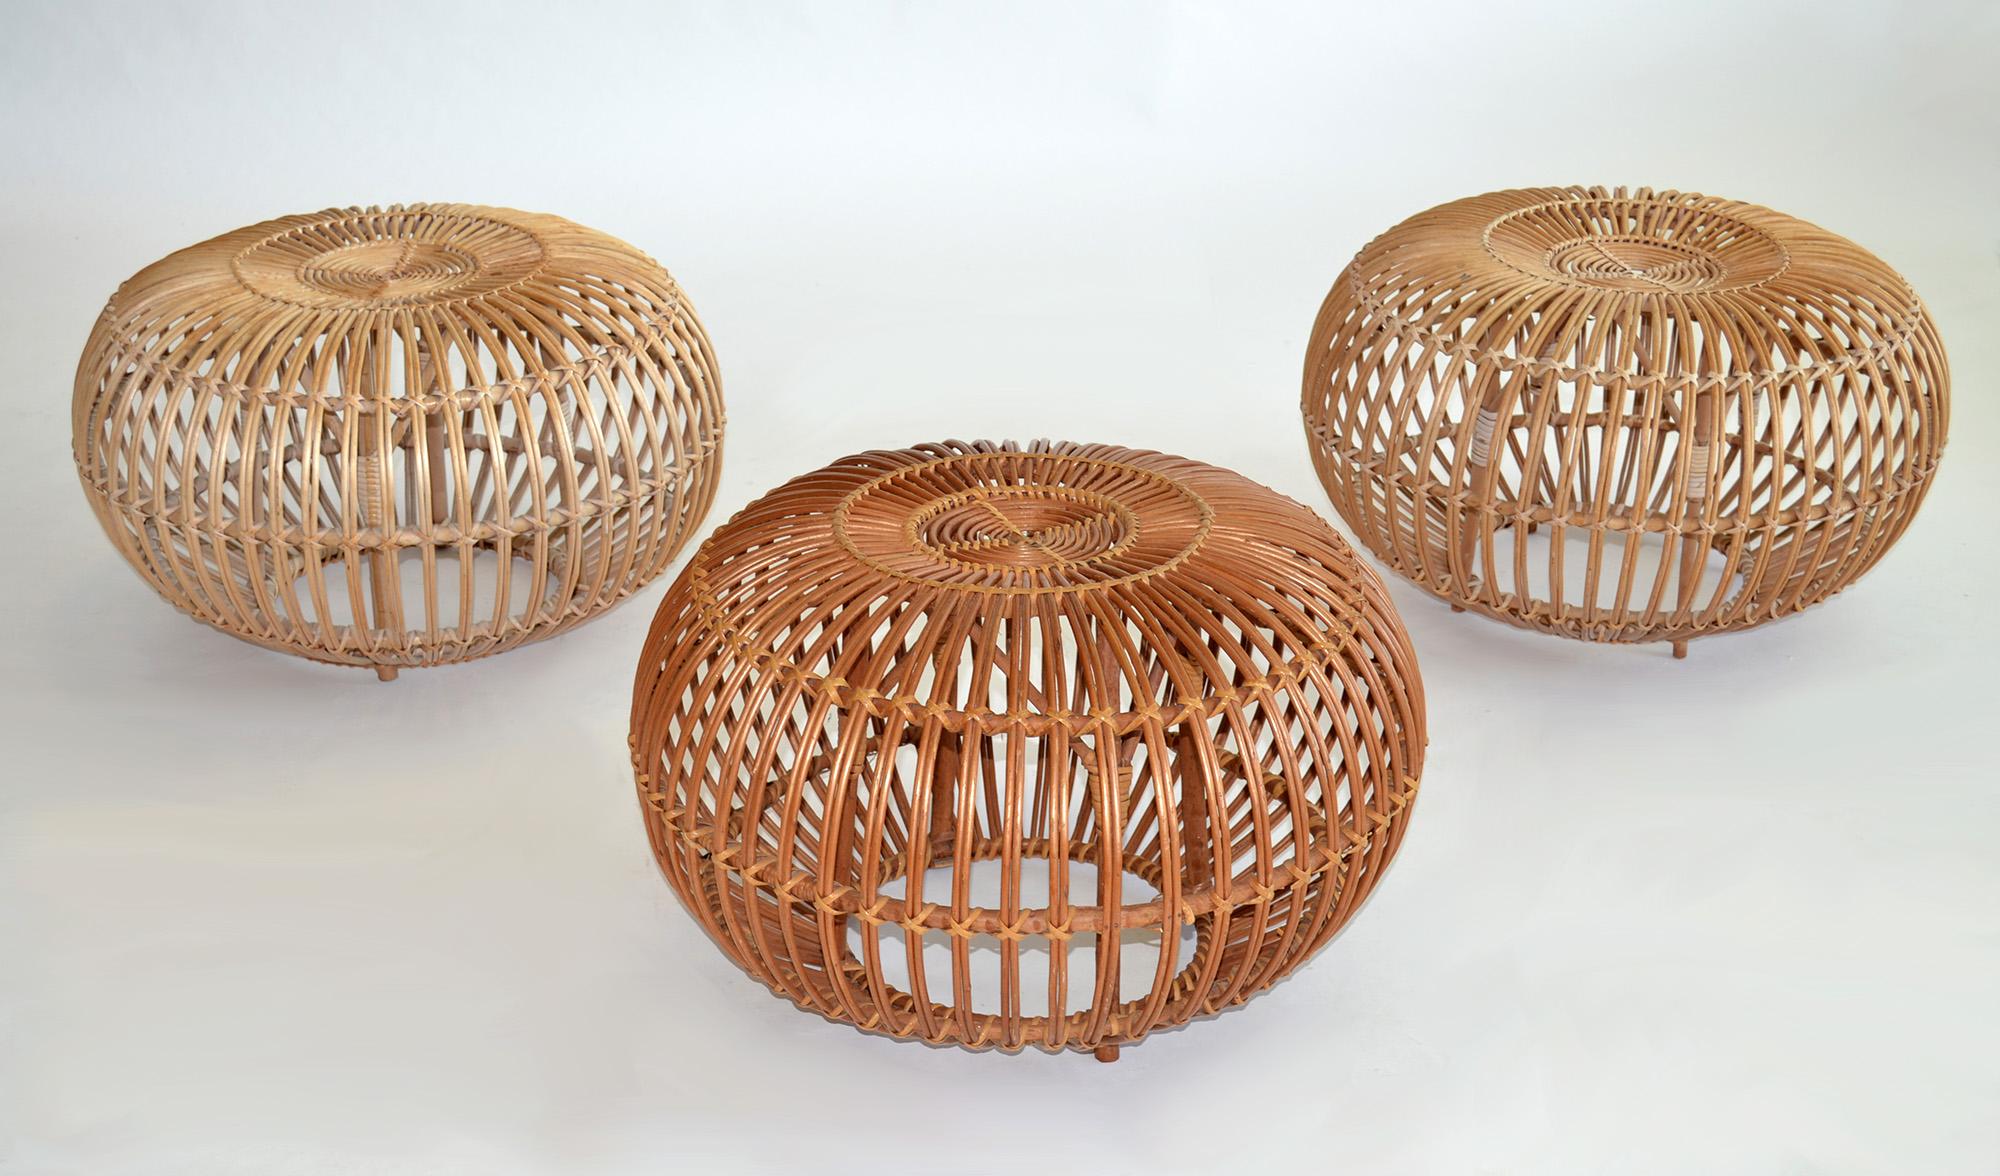 Set of Three Rattan Ottomans, Poufs or Stools by Franco Albini Italy, 1960s
Attributed to Franco Albini and Franca Helg round handwoven rattan, wicker ottoman, pouf, footstool or side tables. Price is for the set of three. Tones vary due to age and